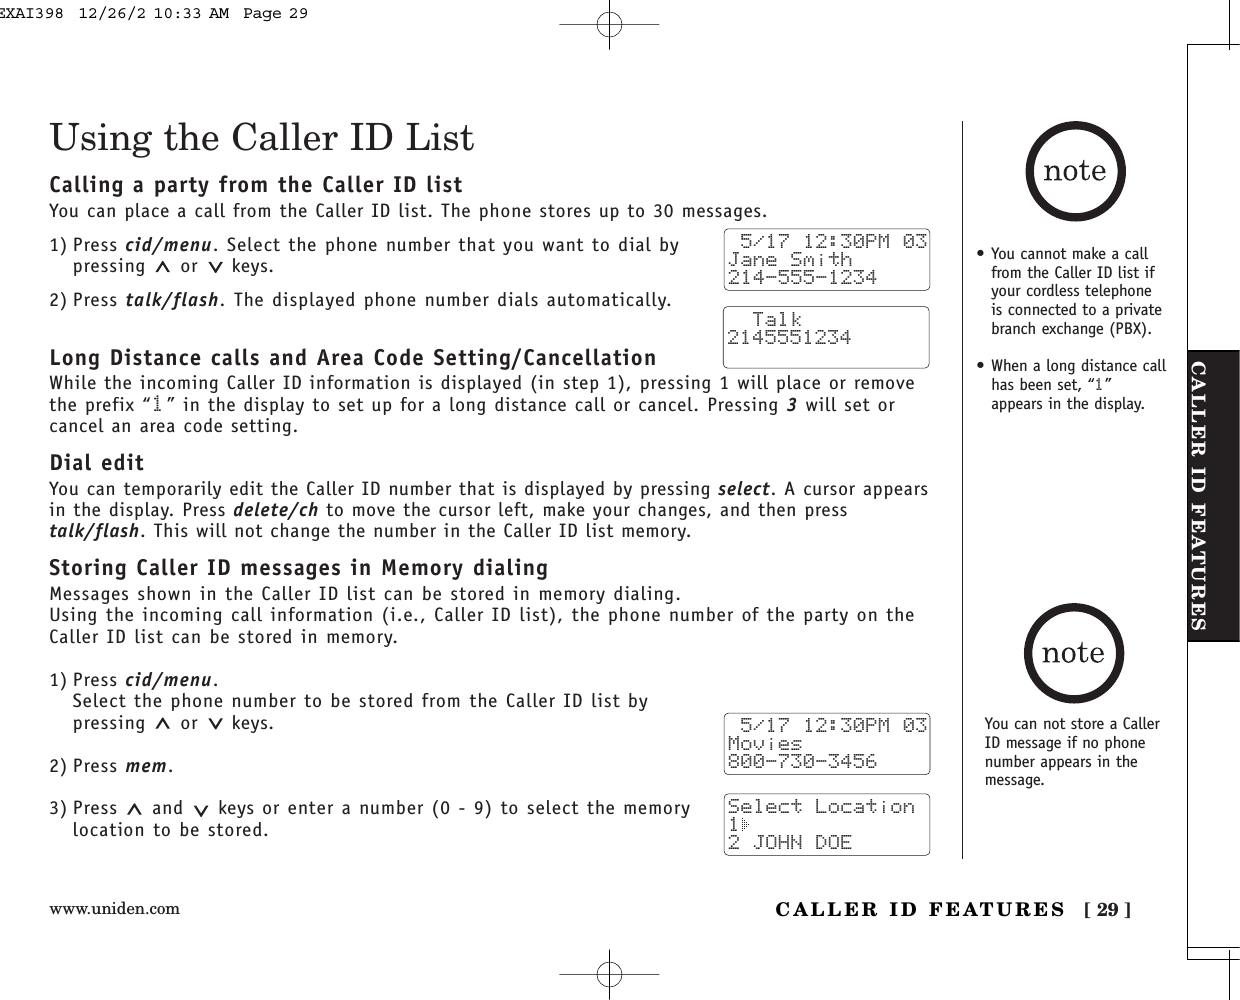 www.uniden.com [ 29 ]CALLER ID FEATURESCALLER ID FEATURES• You cannot make a callfrom the Caller ID list ifyour cordless telephoneis connected to a privatebranch exchange (PBX).• When a long distance callhas been set, “1”appears in the display.Using the Caller ID ListCalling a party from the Caller ID listYou can place a call from the Caller ID list. The phone stores up to 30 messages.1) Press cid/menu. Select the phone number that you want to dial bypressing or keys.2) Press talk/flash. The displayed phone number dials automatically.Long Distance calls and Area Code Setting/CancellationWhile the incoming Caller ID information is displayed (in step 1), pressing 1 will place or removethe prefix “1” in the display to set up for a long distance call or cancel. Pressing 3will set orcancel an area code setting.Dial editYou can temporarily edit the Caller ID number that is displayed by pressing select. A cursor appearsin the display. Press delete/ch to move the cursor left, make your changes, and then presstalk/flash. This will not change the number in the Caller ID list memory. Storing Caller ID messages in Memory dialingMessages shown in the Caller ID list can be stored in memory dialing.Using the incoming call information (i.e., Caller ID list), the phone number of the party on theCaller ID list can be stored in memory.1) Press cid/menu.Select the phone number to be stored from the Caller ID list bypressing or keys.2) Press mem.3) Press and keys or enter a number (0 - 9) to select the memorylocation to be stored. 5/17 12:30PM 03Jane Smith214-555-1234  Talk2145551234 5/17 12:30PM 03Movies800-730-3456Select Location1 2 JOHN DOEYou can not store a CallerID message if no phonenumber appears in themessage.EXAI398  12/26/2 10:33 AM  Page 29